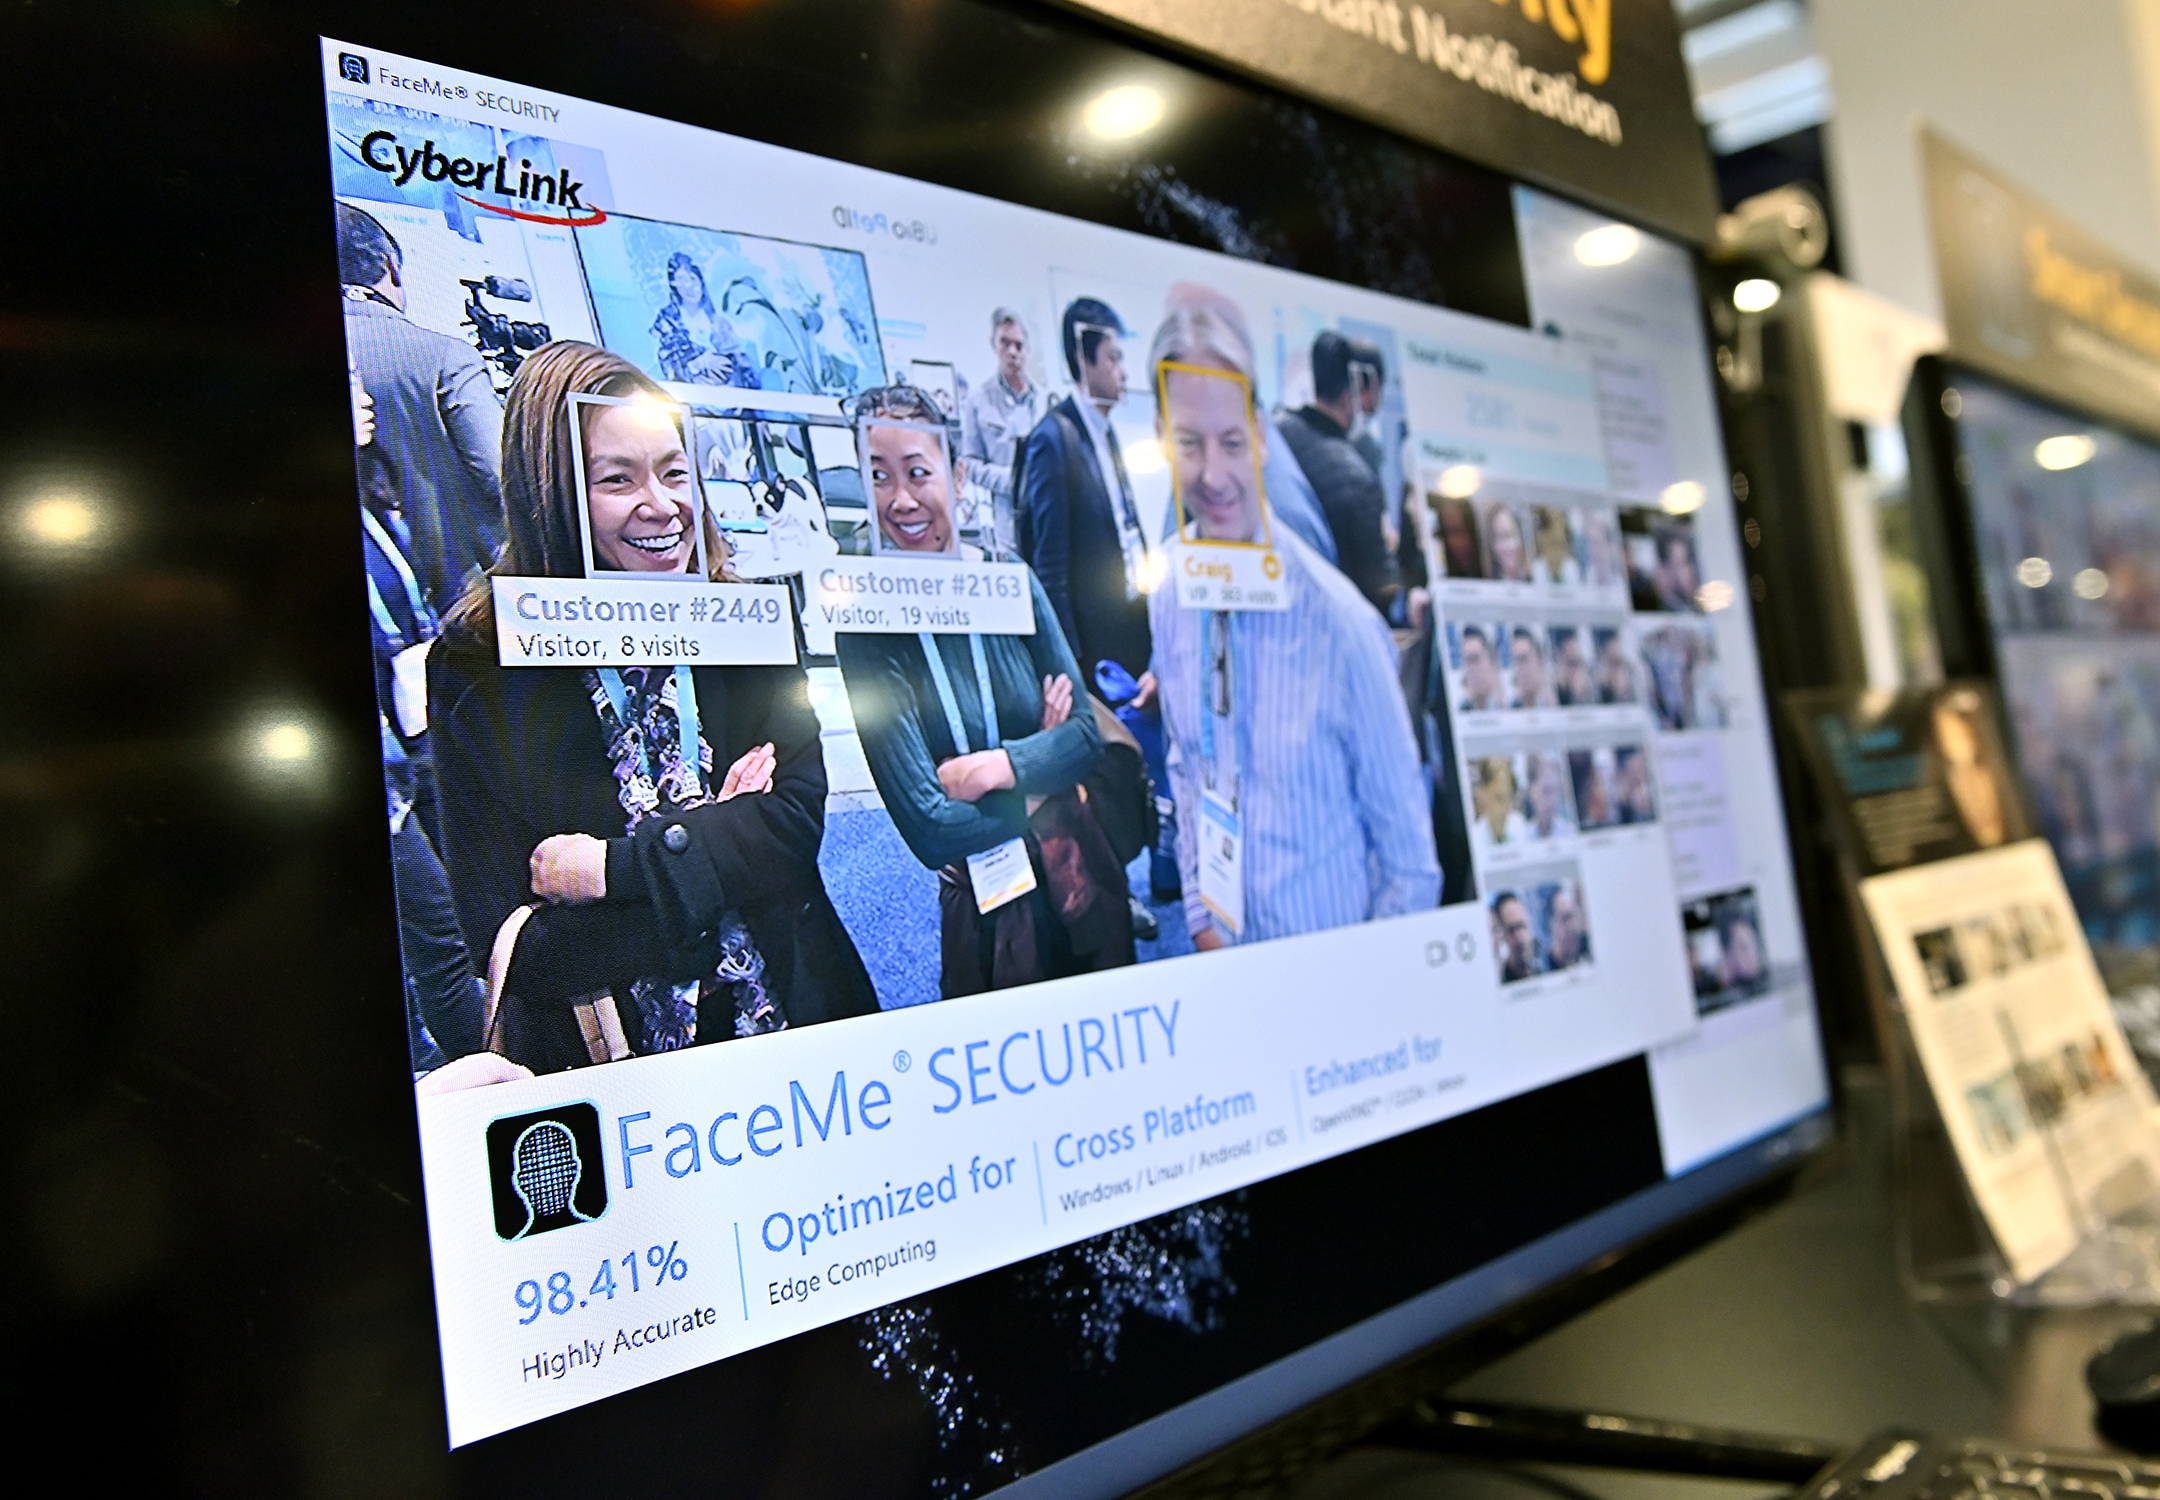 Attendees at CES 2020 have their images captured with facial recognition software